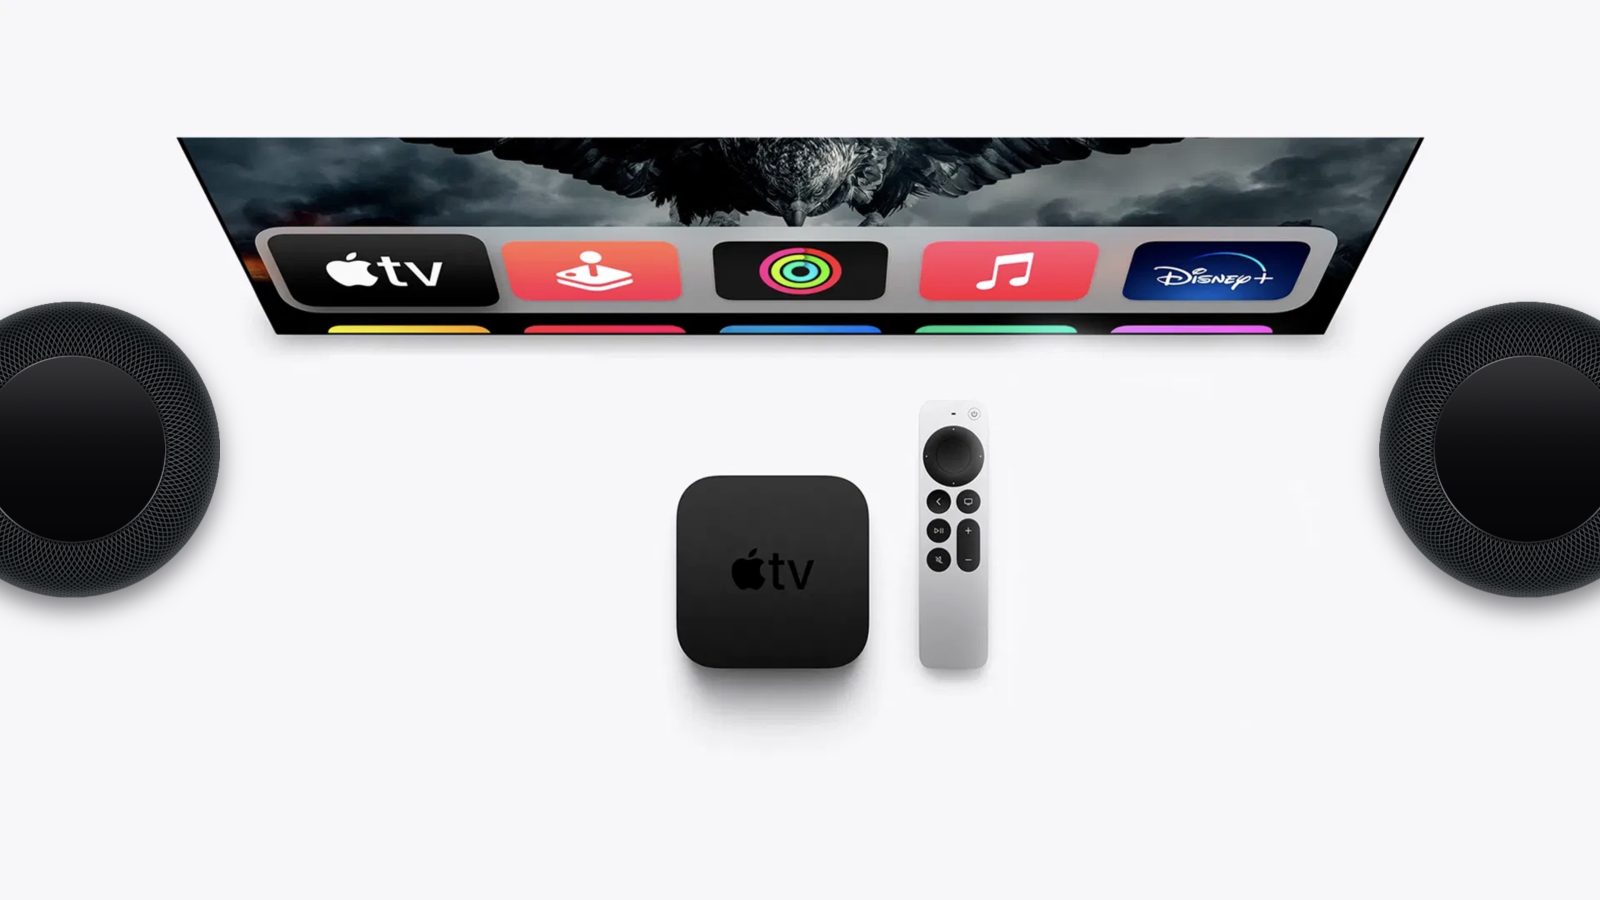 kloon ontsnappen idee Feature Request: Apple TV and HomePod need better integration - 9to5Mac